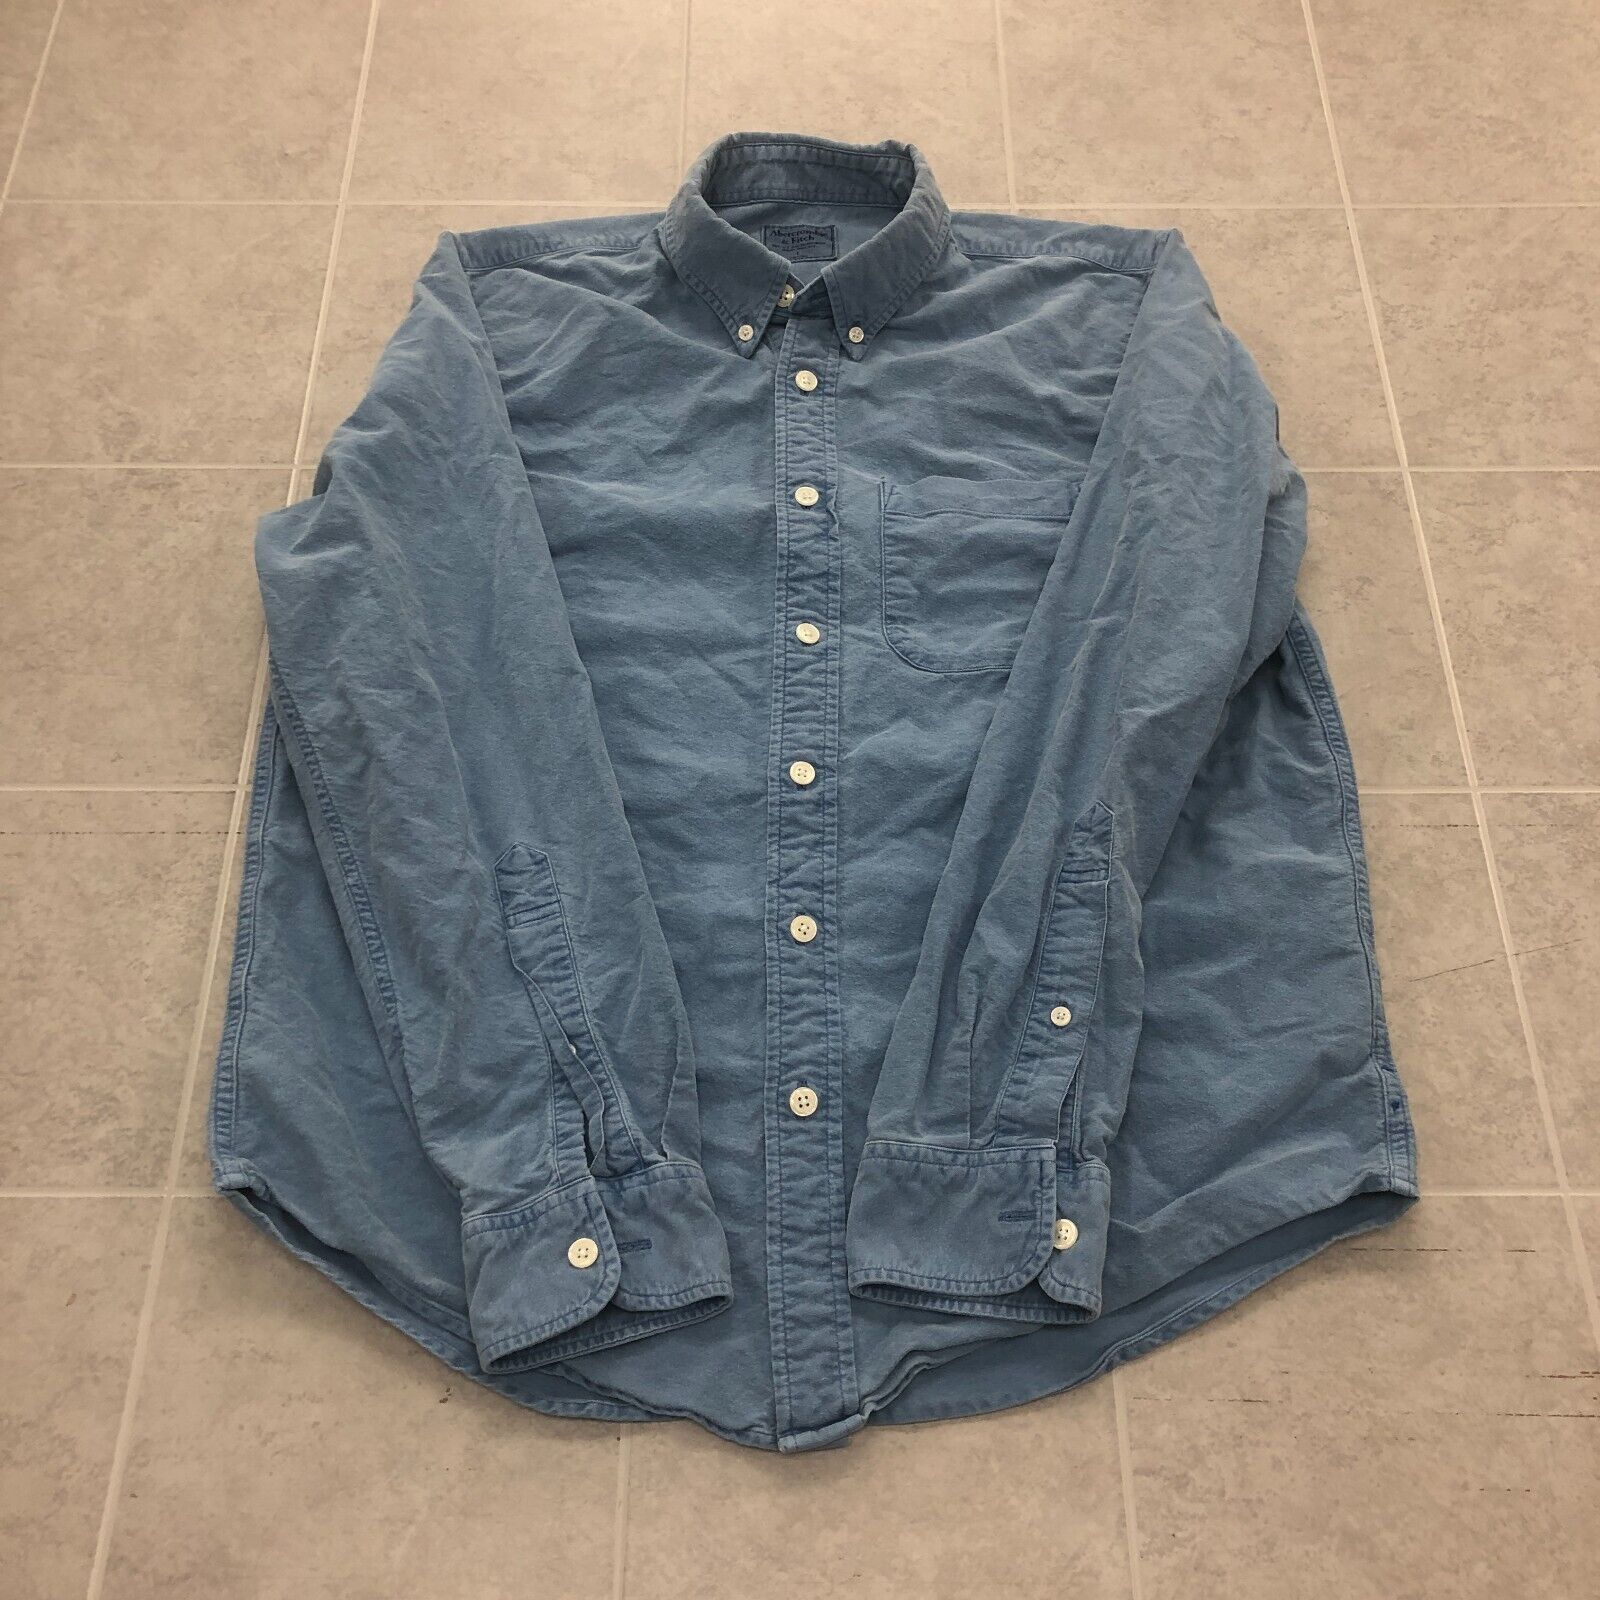 Abercrombie & Fitch Blue Casual Long Sleeve Button Up Shirt Adult Size L